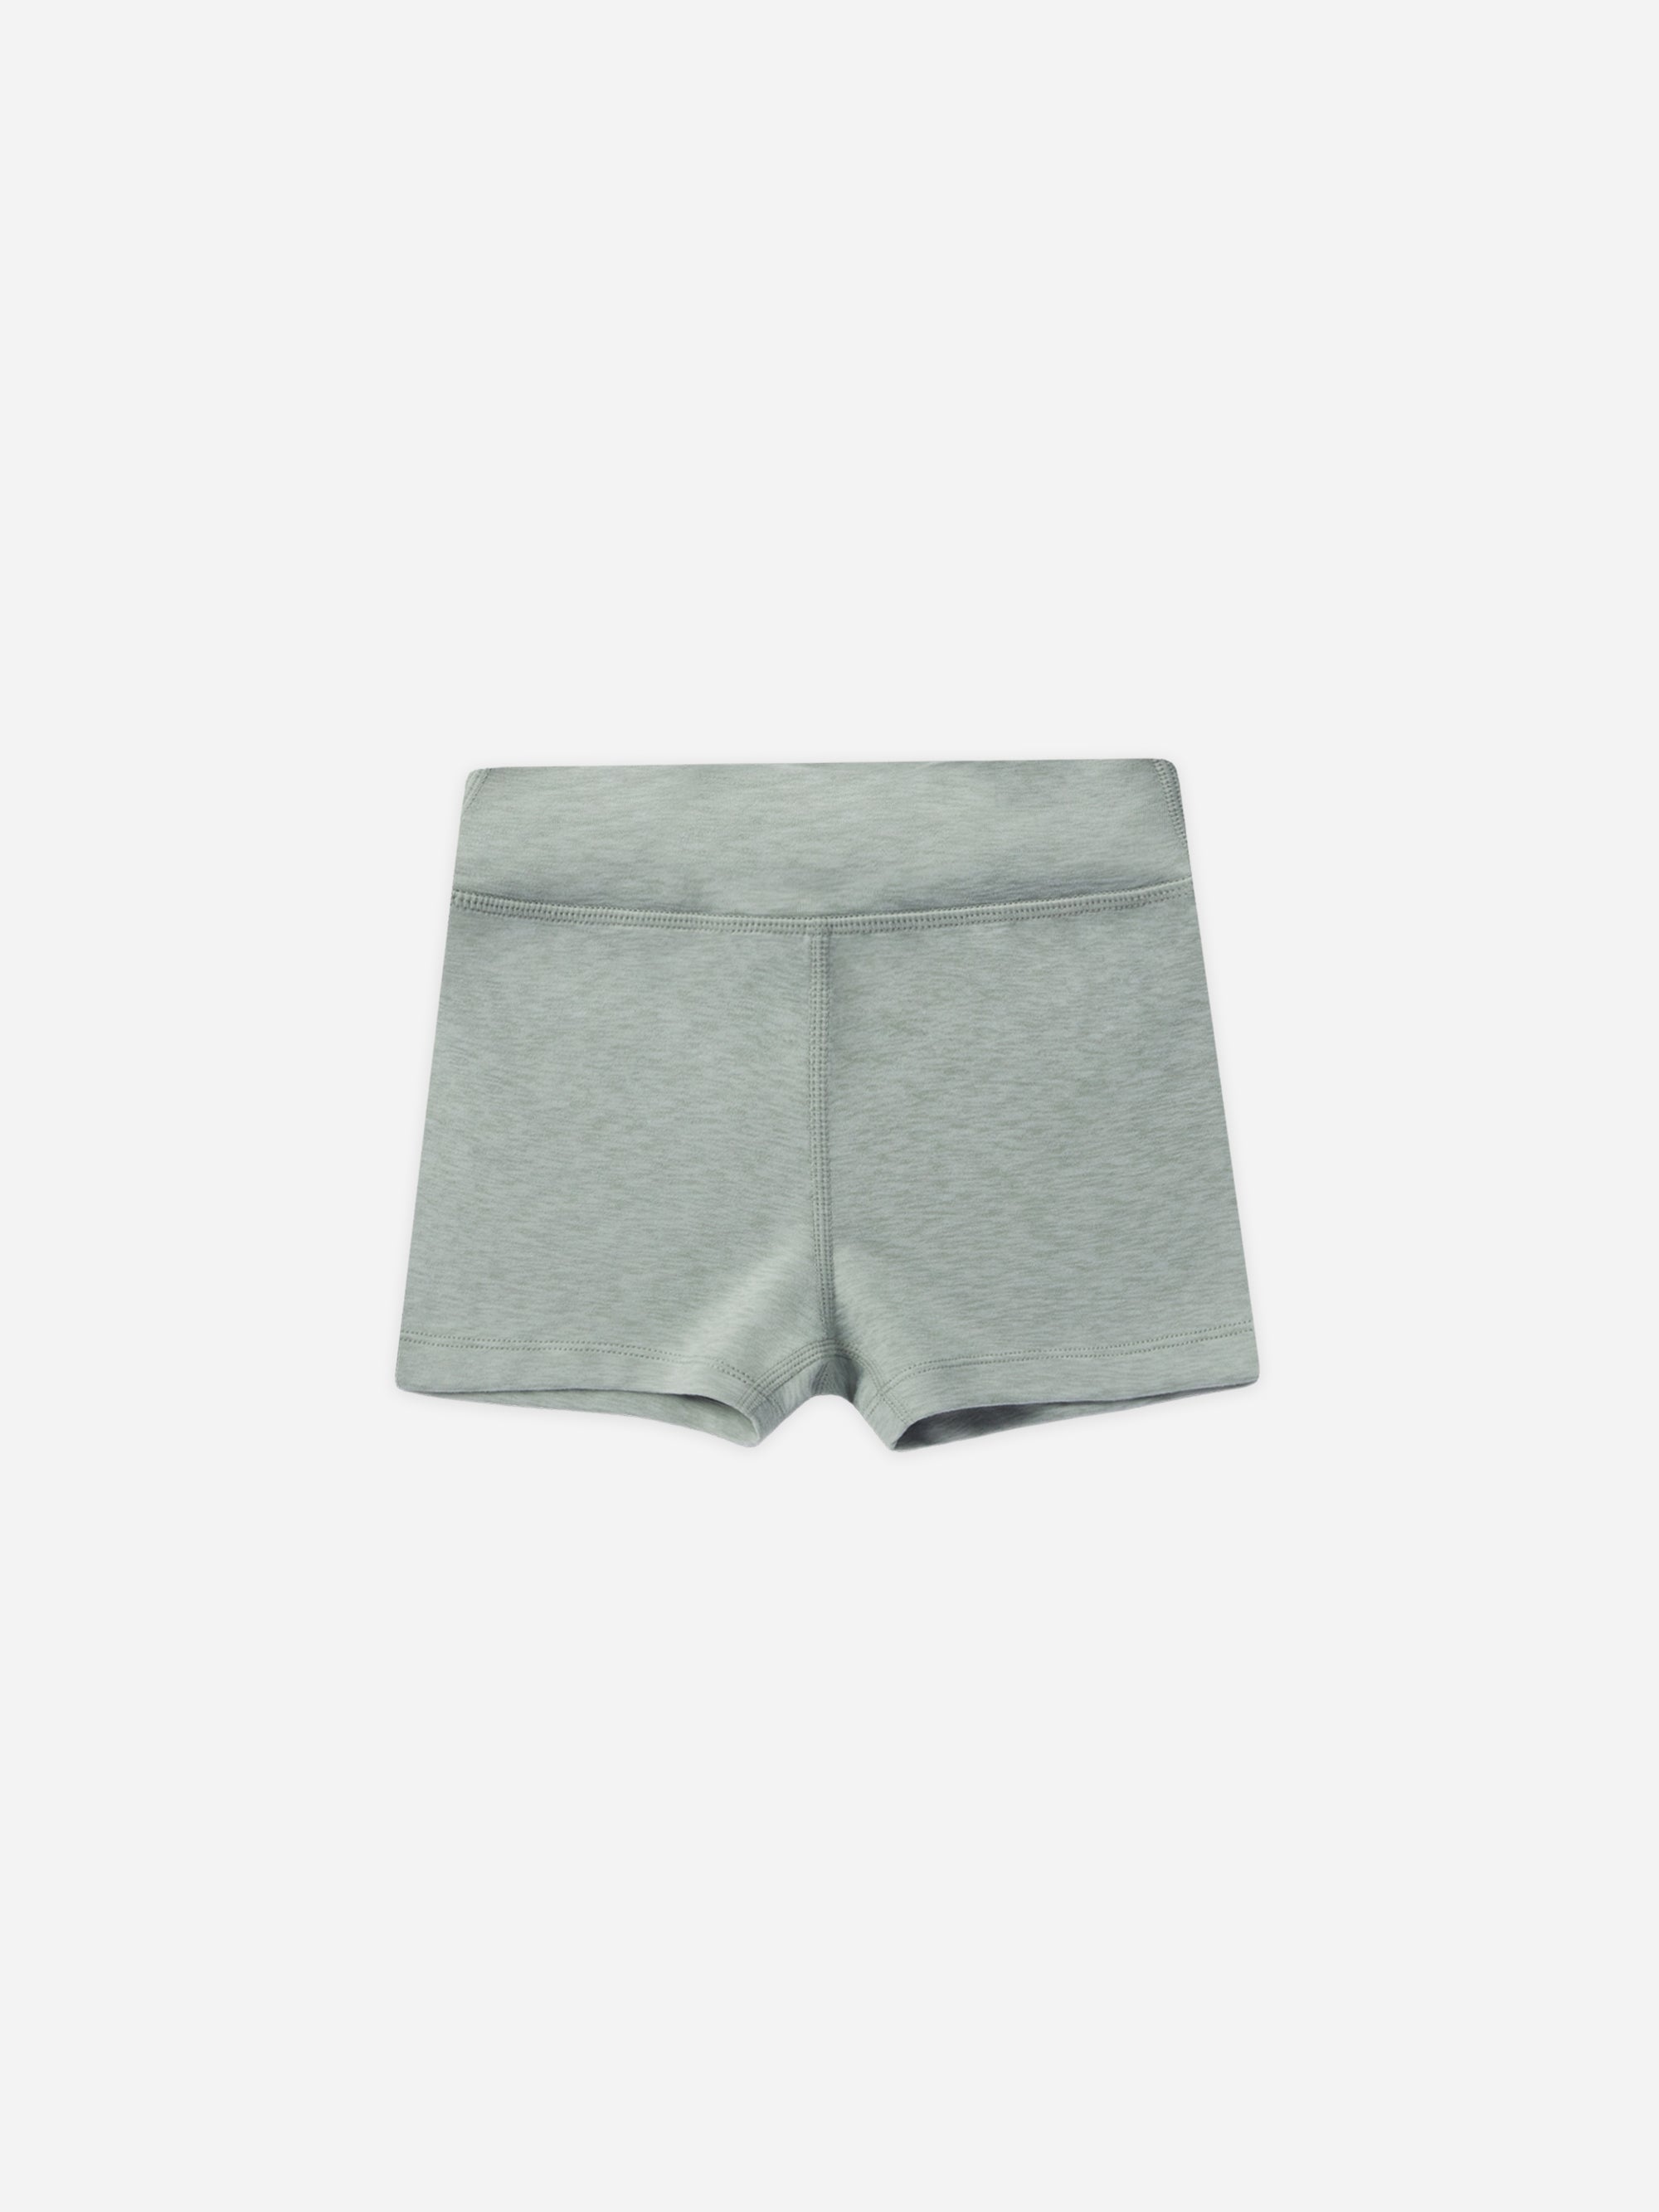 Shortie Short || Heathered Seafoam - Rylee + Cru | Kids Clothes | Trendy Baby Clothes | Modern Infant Outfits |